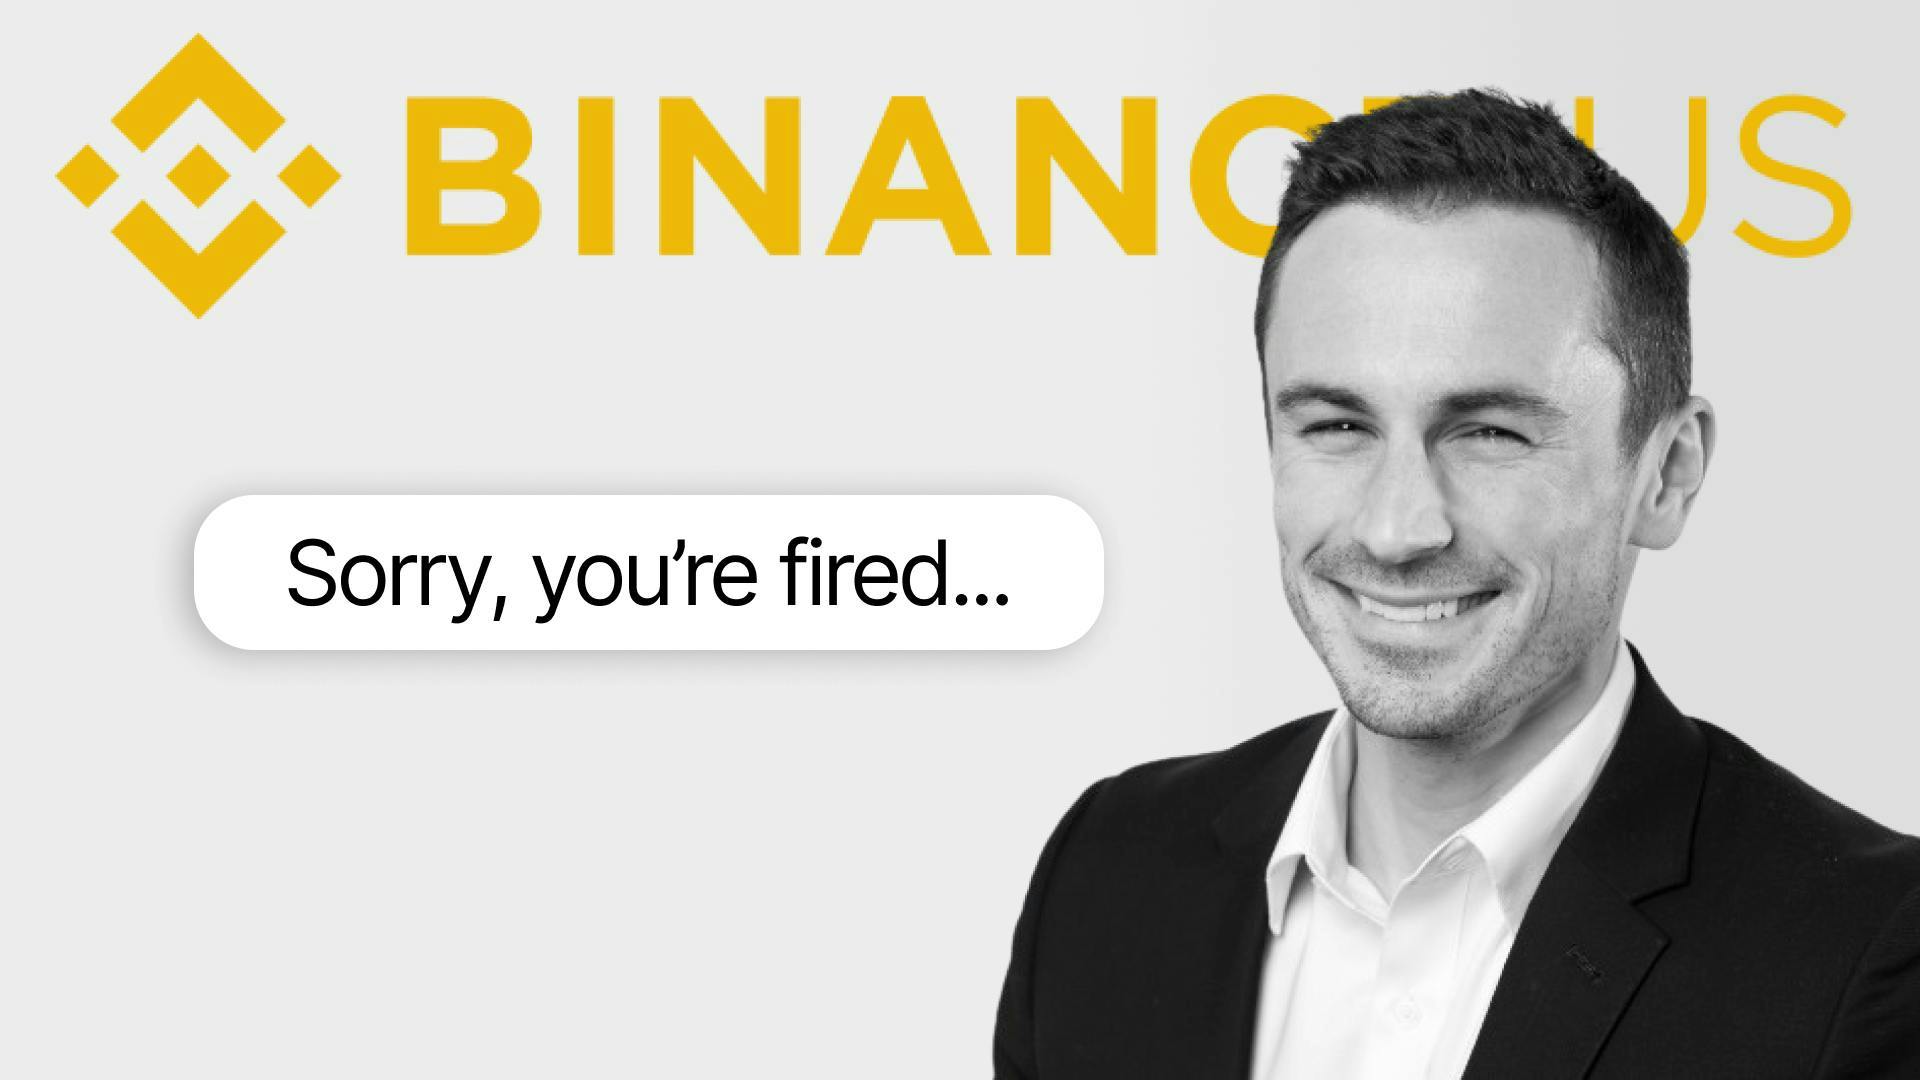 Binance.US Faces Fallout - Massive Layoffs and Legal Battles